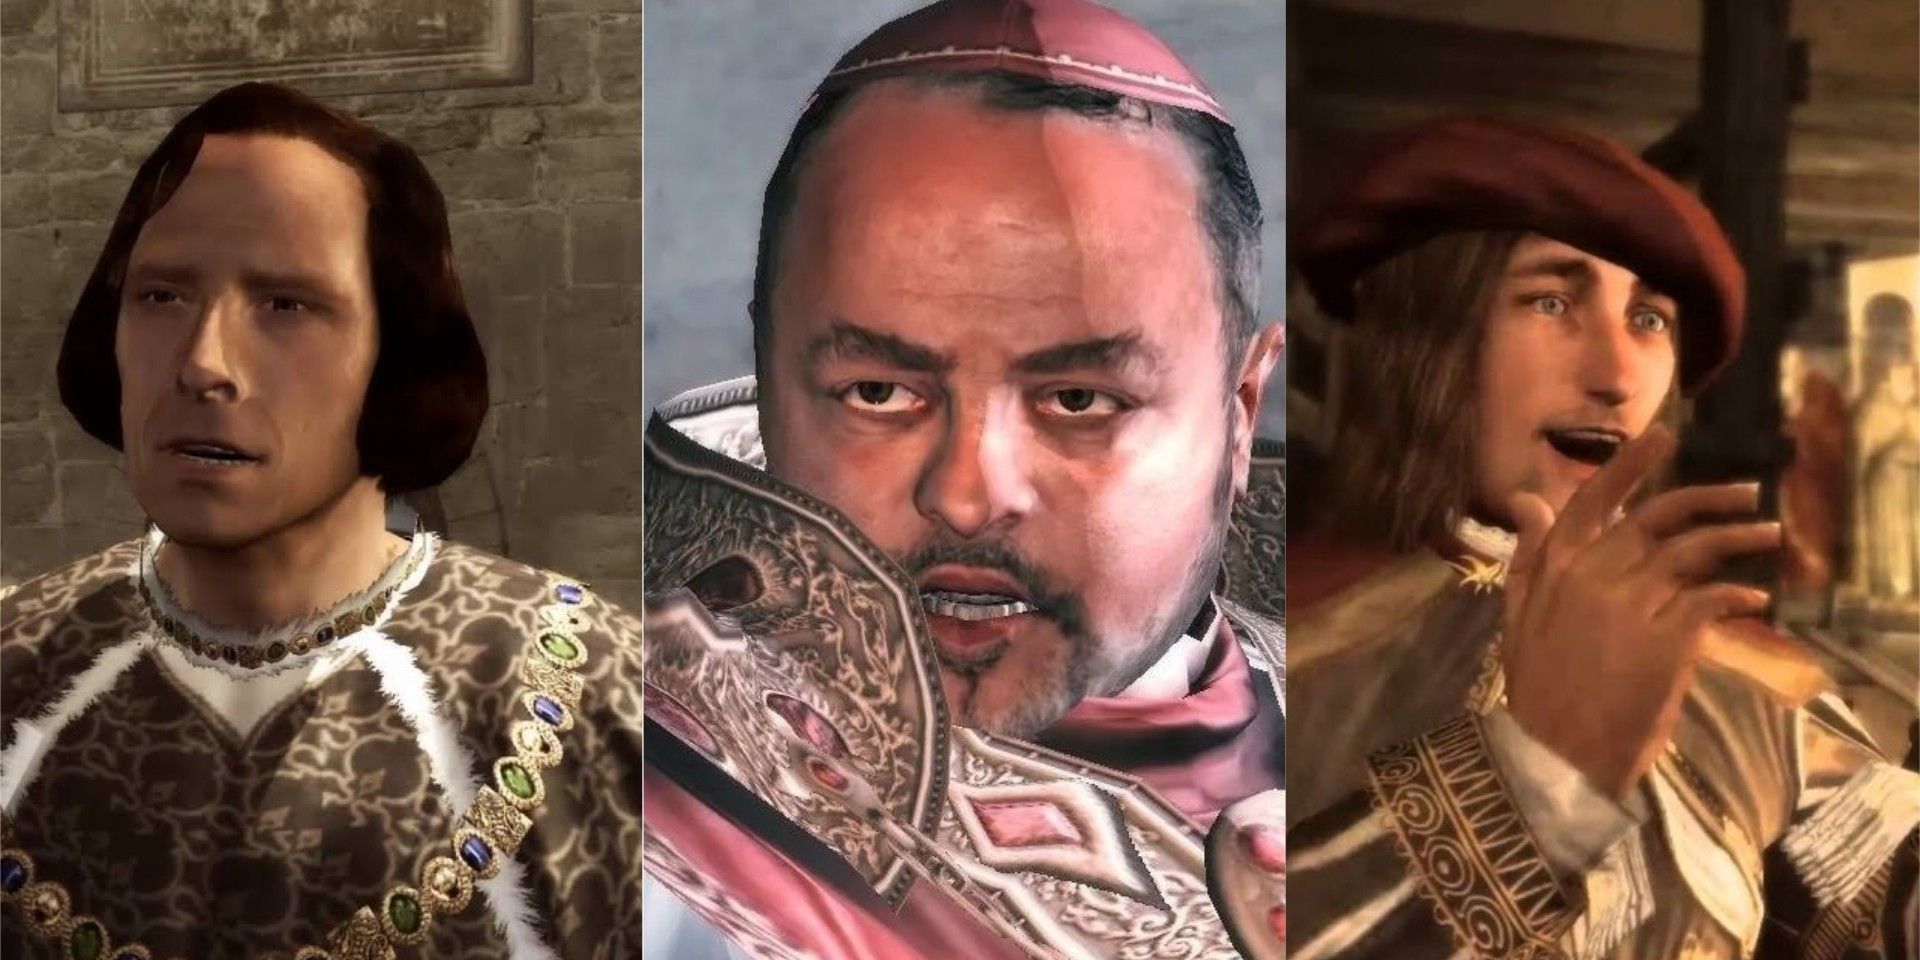 Every historical figure in the game